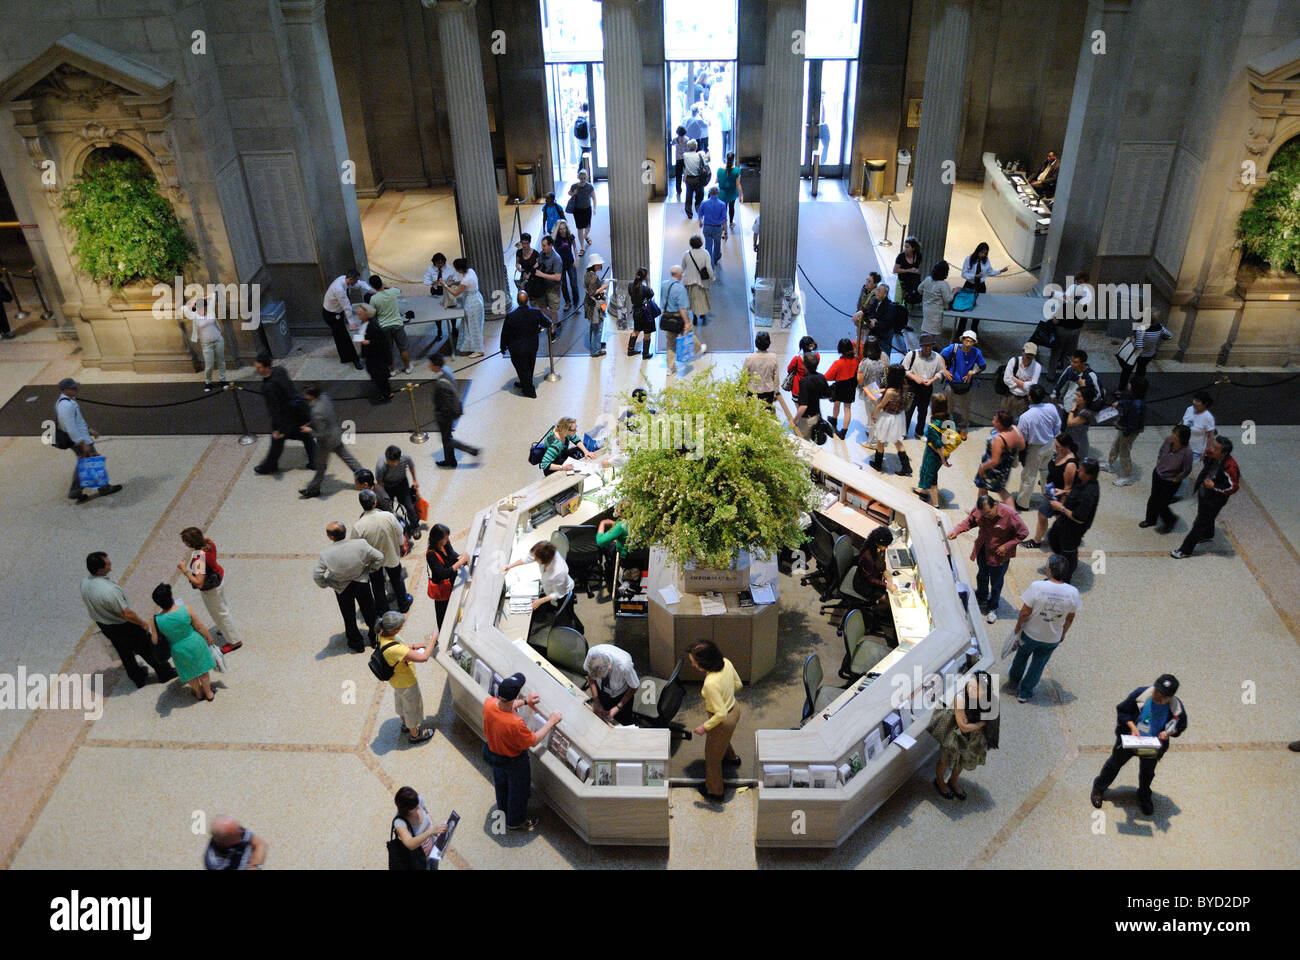 The Great Hall at the Metropolitan Museum of Art in New York City. May 4, 2010. Stock Photo